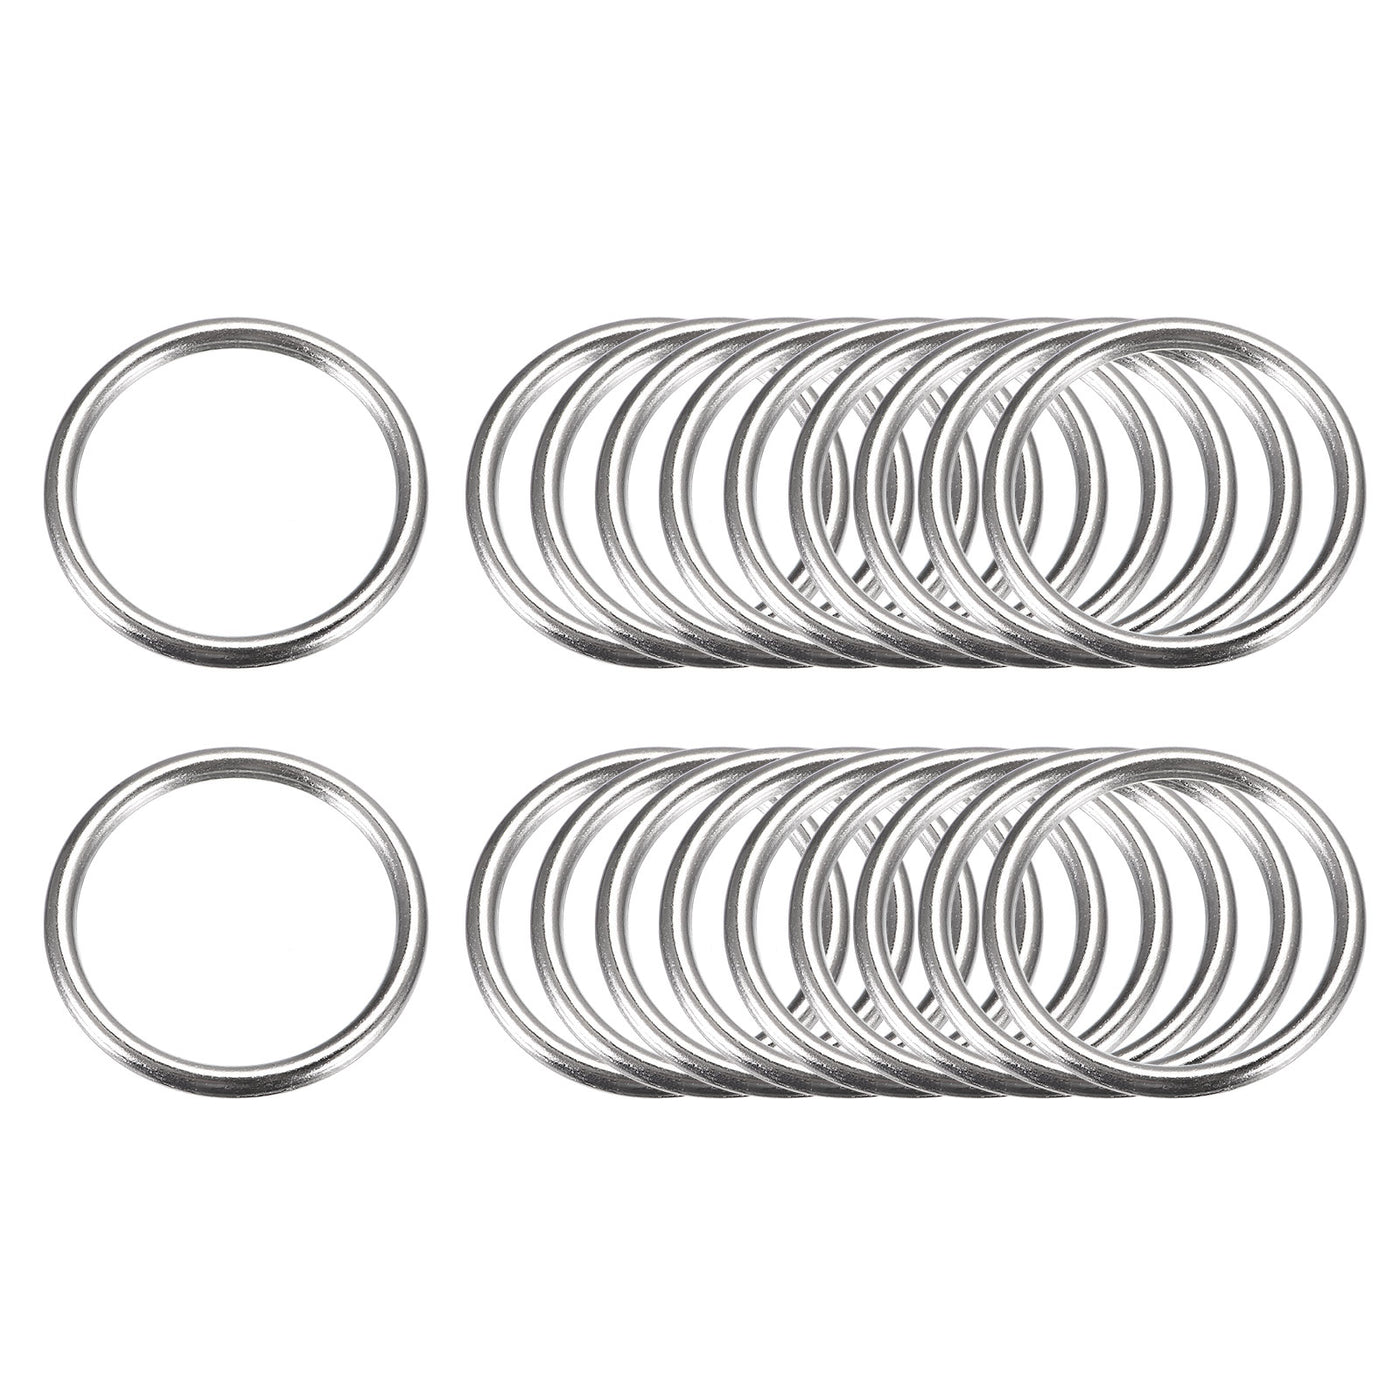 uxcell Uxcell Metal O Rings, 20pcs 30mm(1.18") ID 3mm Thick Welded O-Ringe, Silver Tone